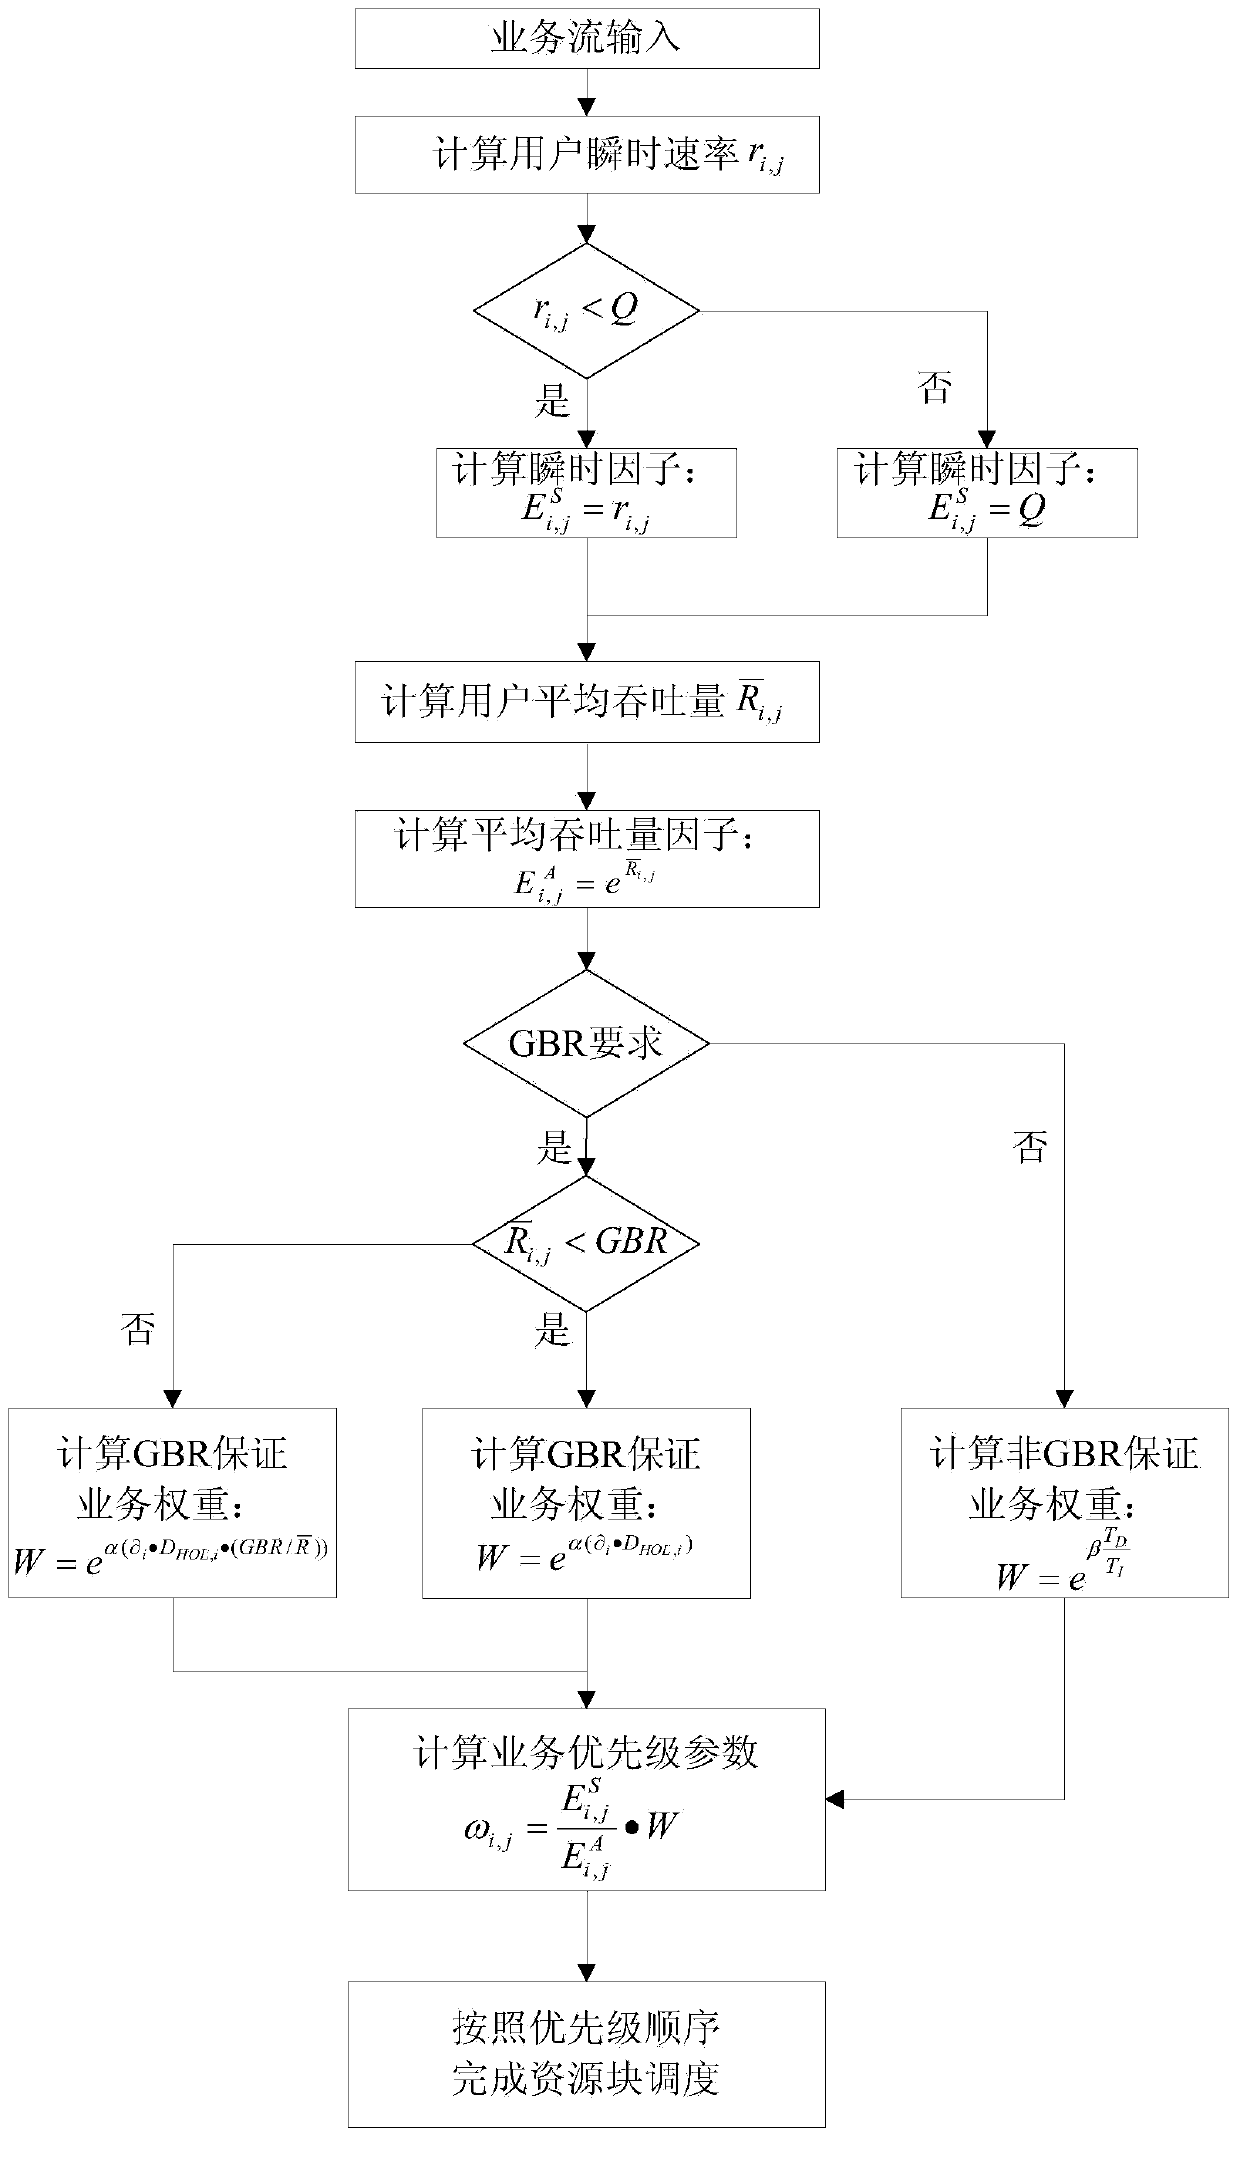 Downlink resource scheduling method for hybrid service in LTE (long term evolution) system